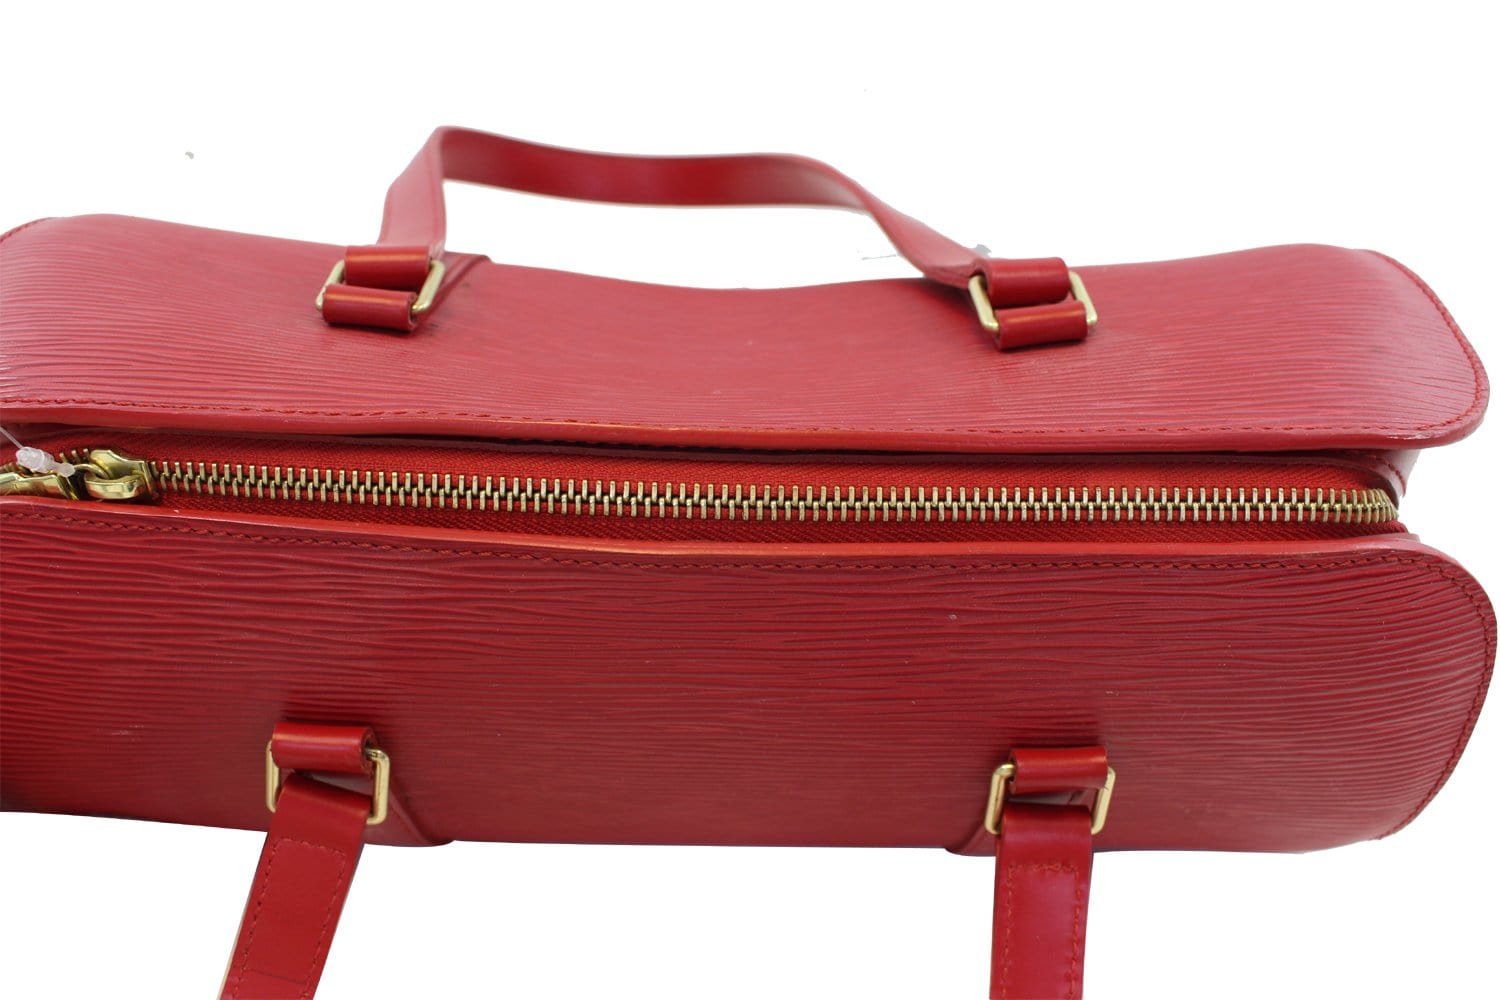 Sold at Auction: A LOUIS VUITTON TUILERIES BAG; red and navy Epi leather  with exterior accents of hot pink, outside pocket features a double-zip  clos